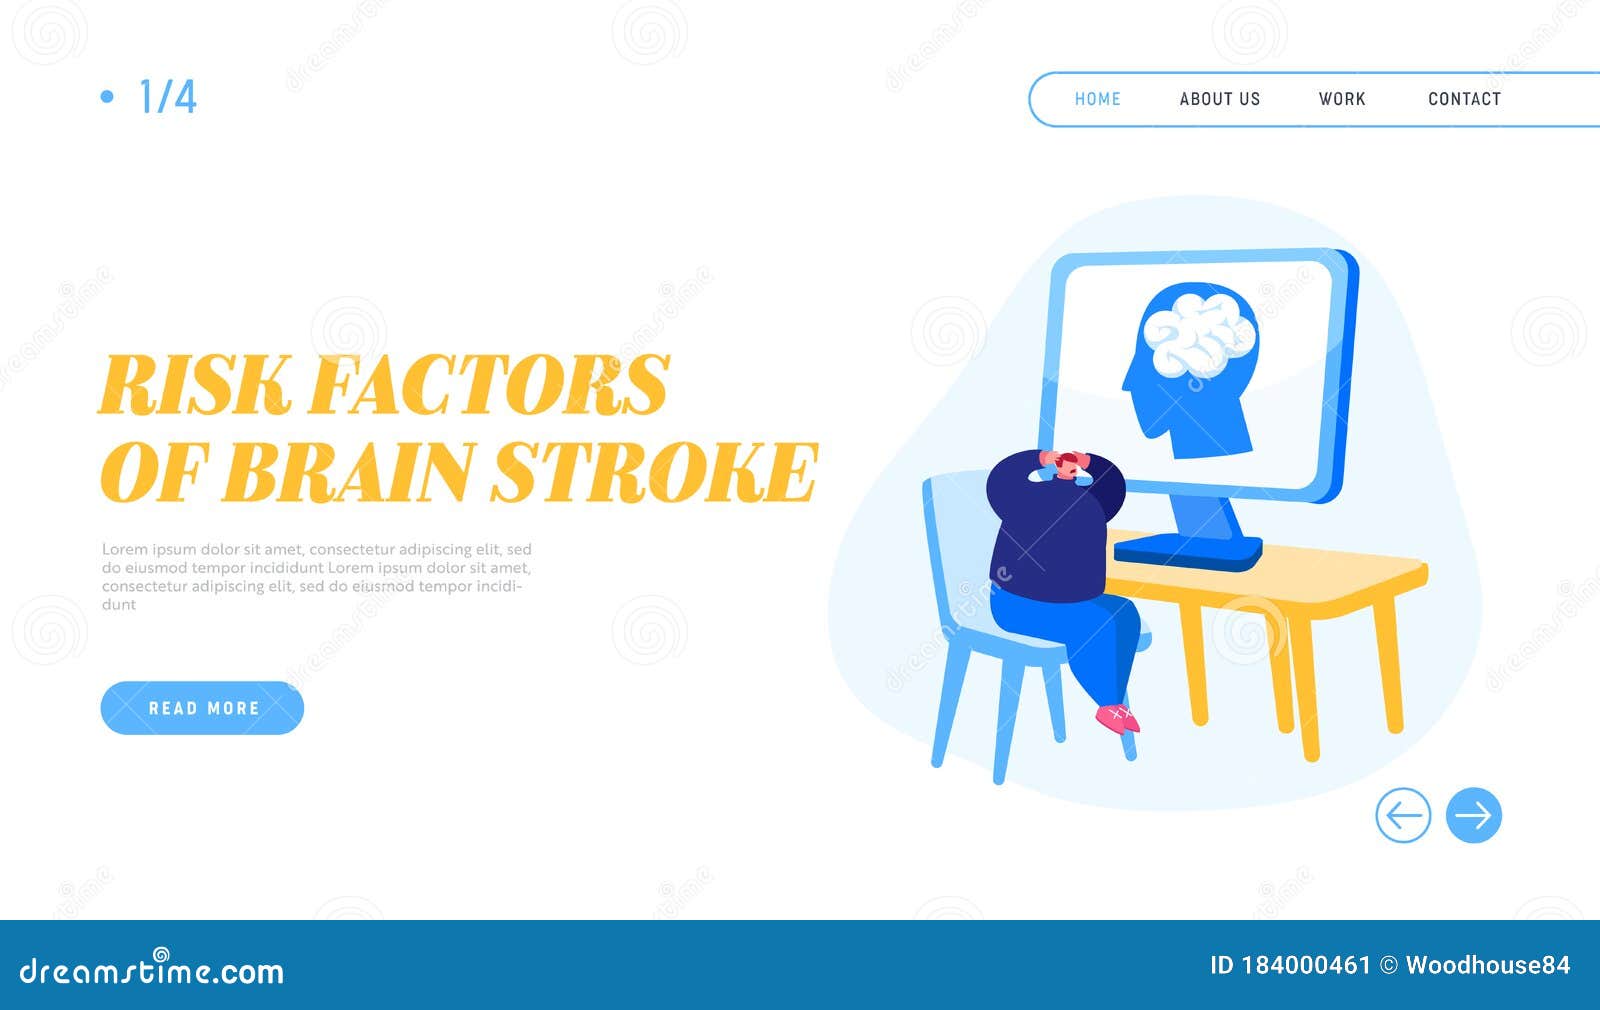 hypertension crisis landing page template. male character have brain stroke, apoplexy attack on working place